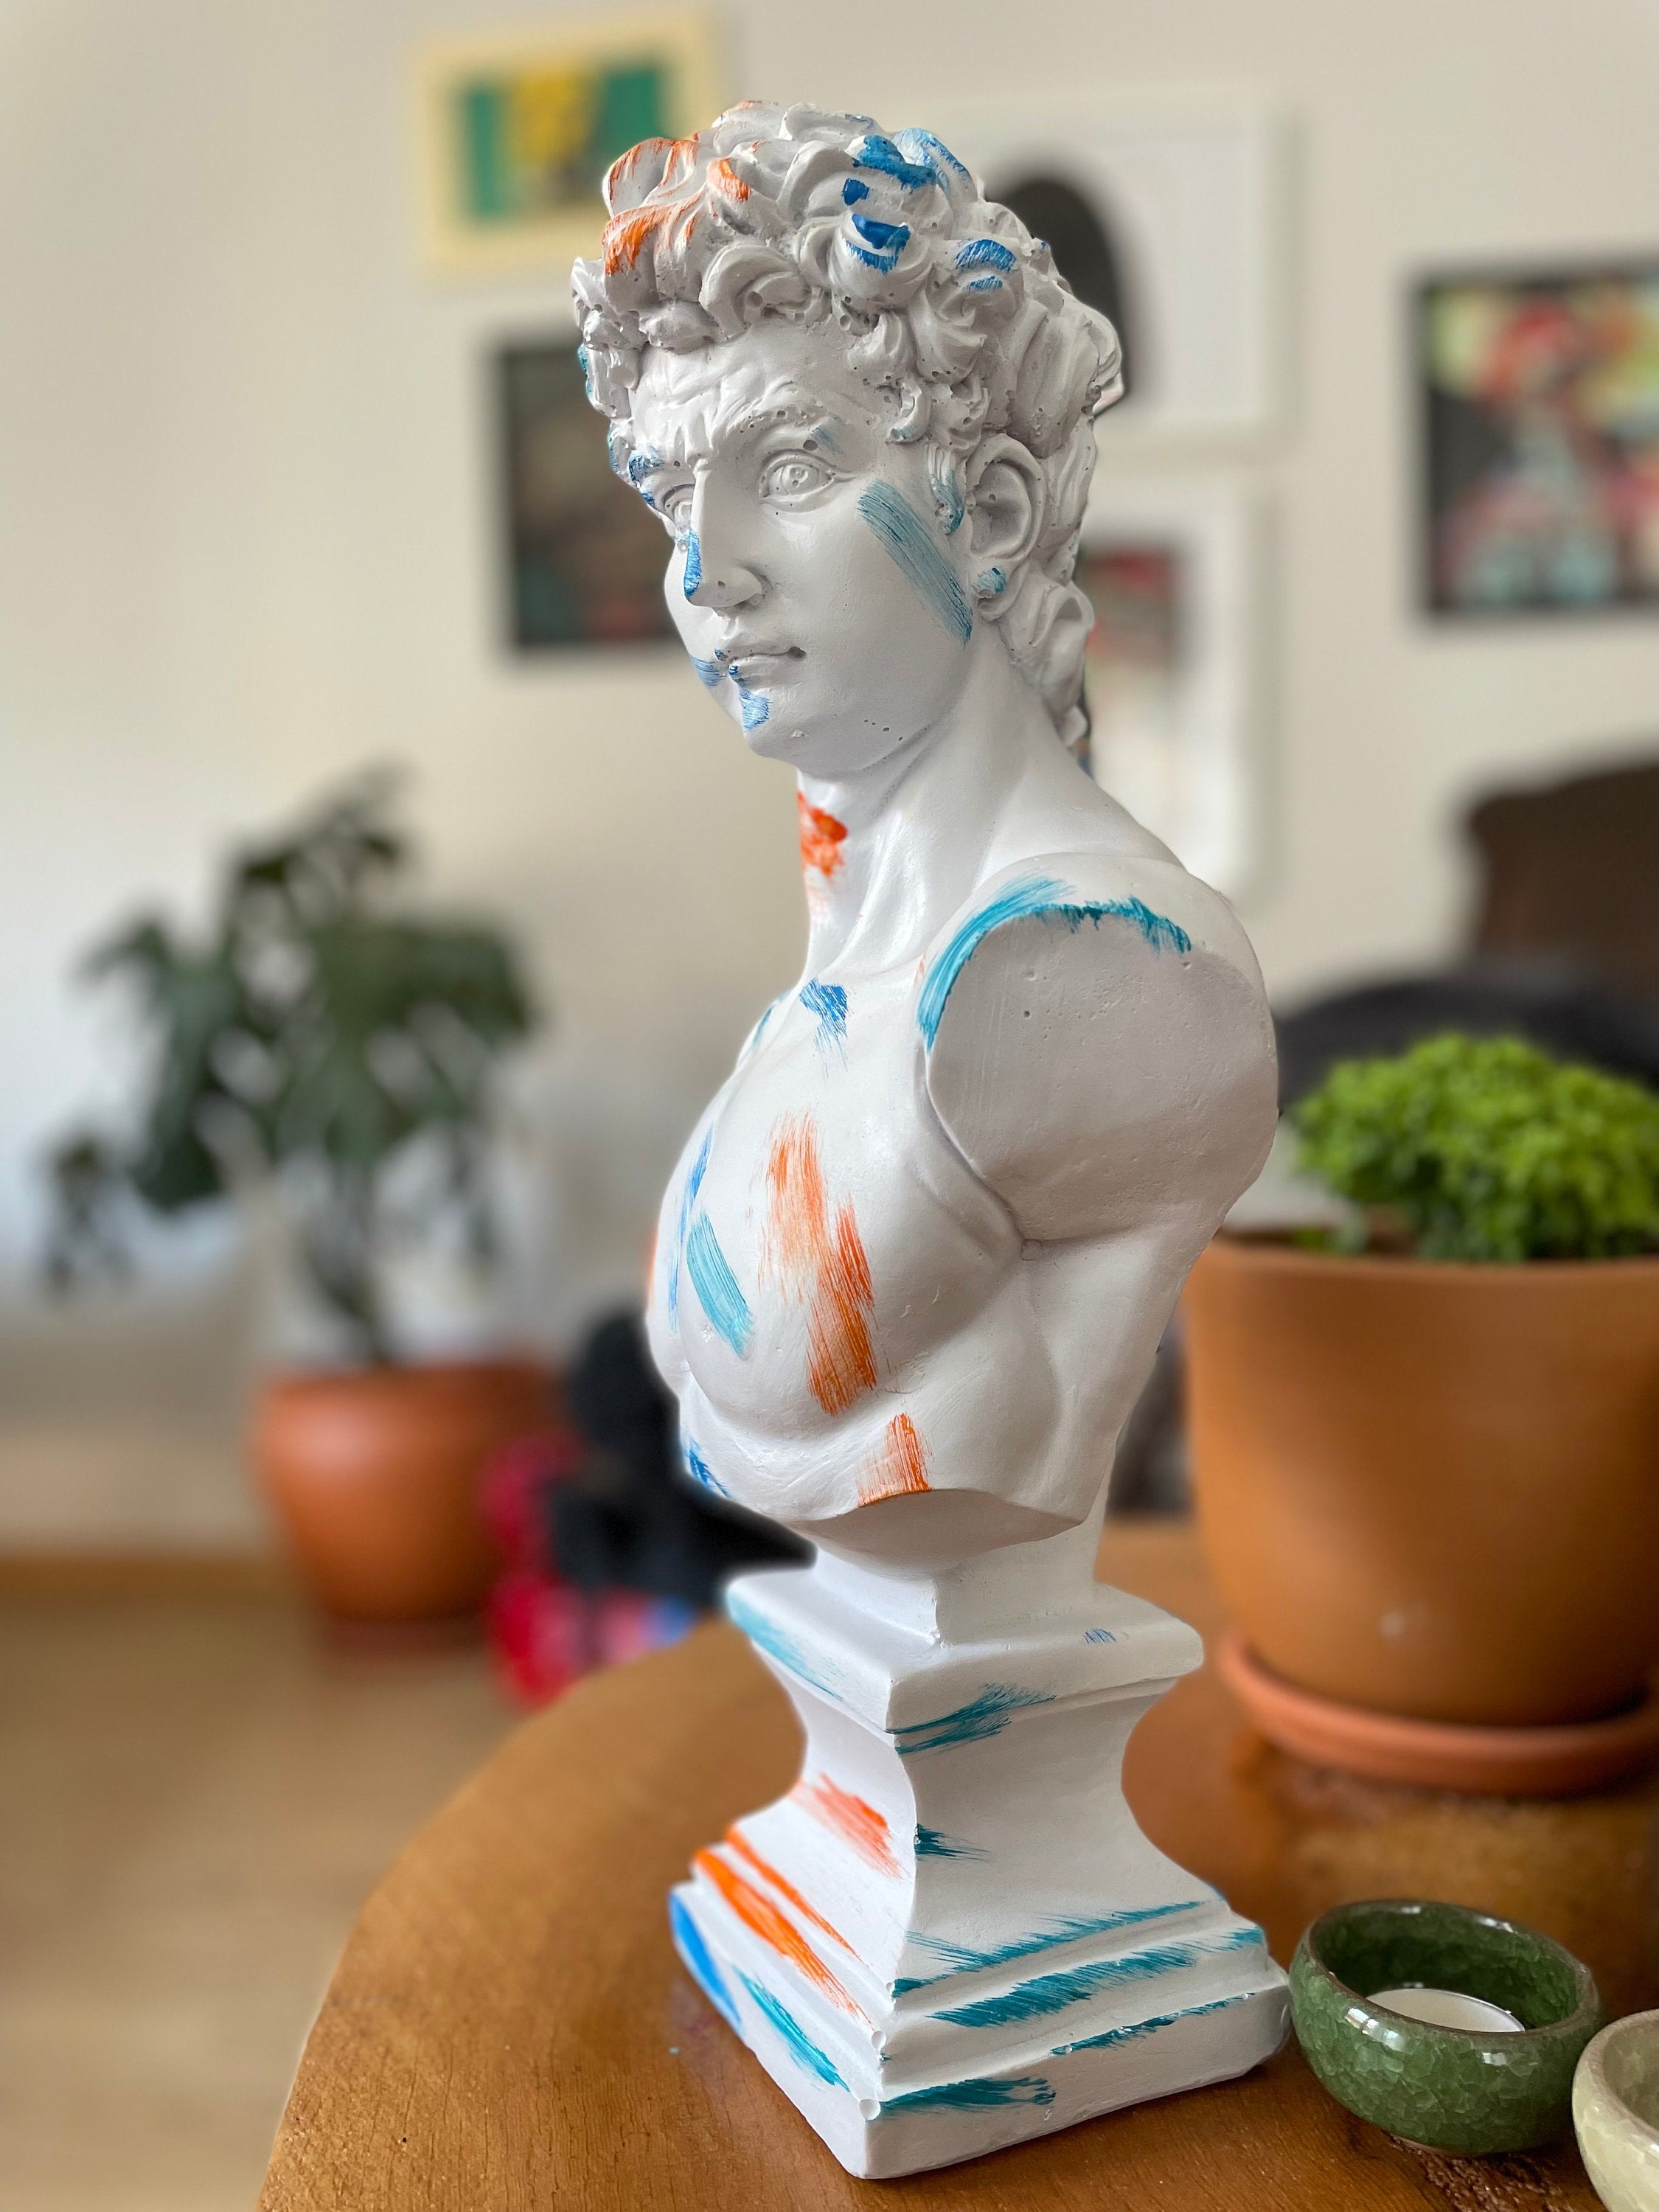 Harmonious Fusion: Large David Bust Sculpture with Colorful Accents